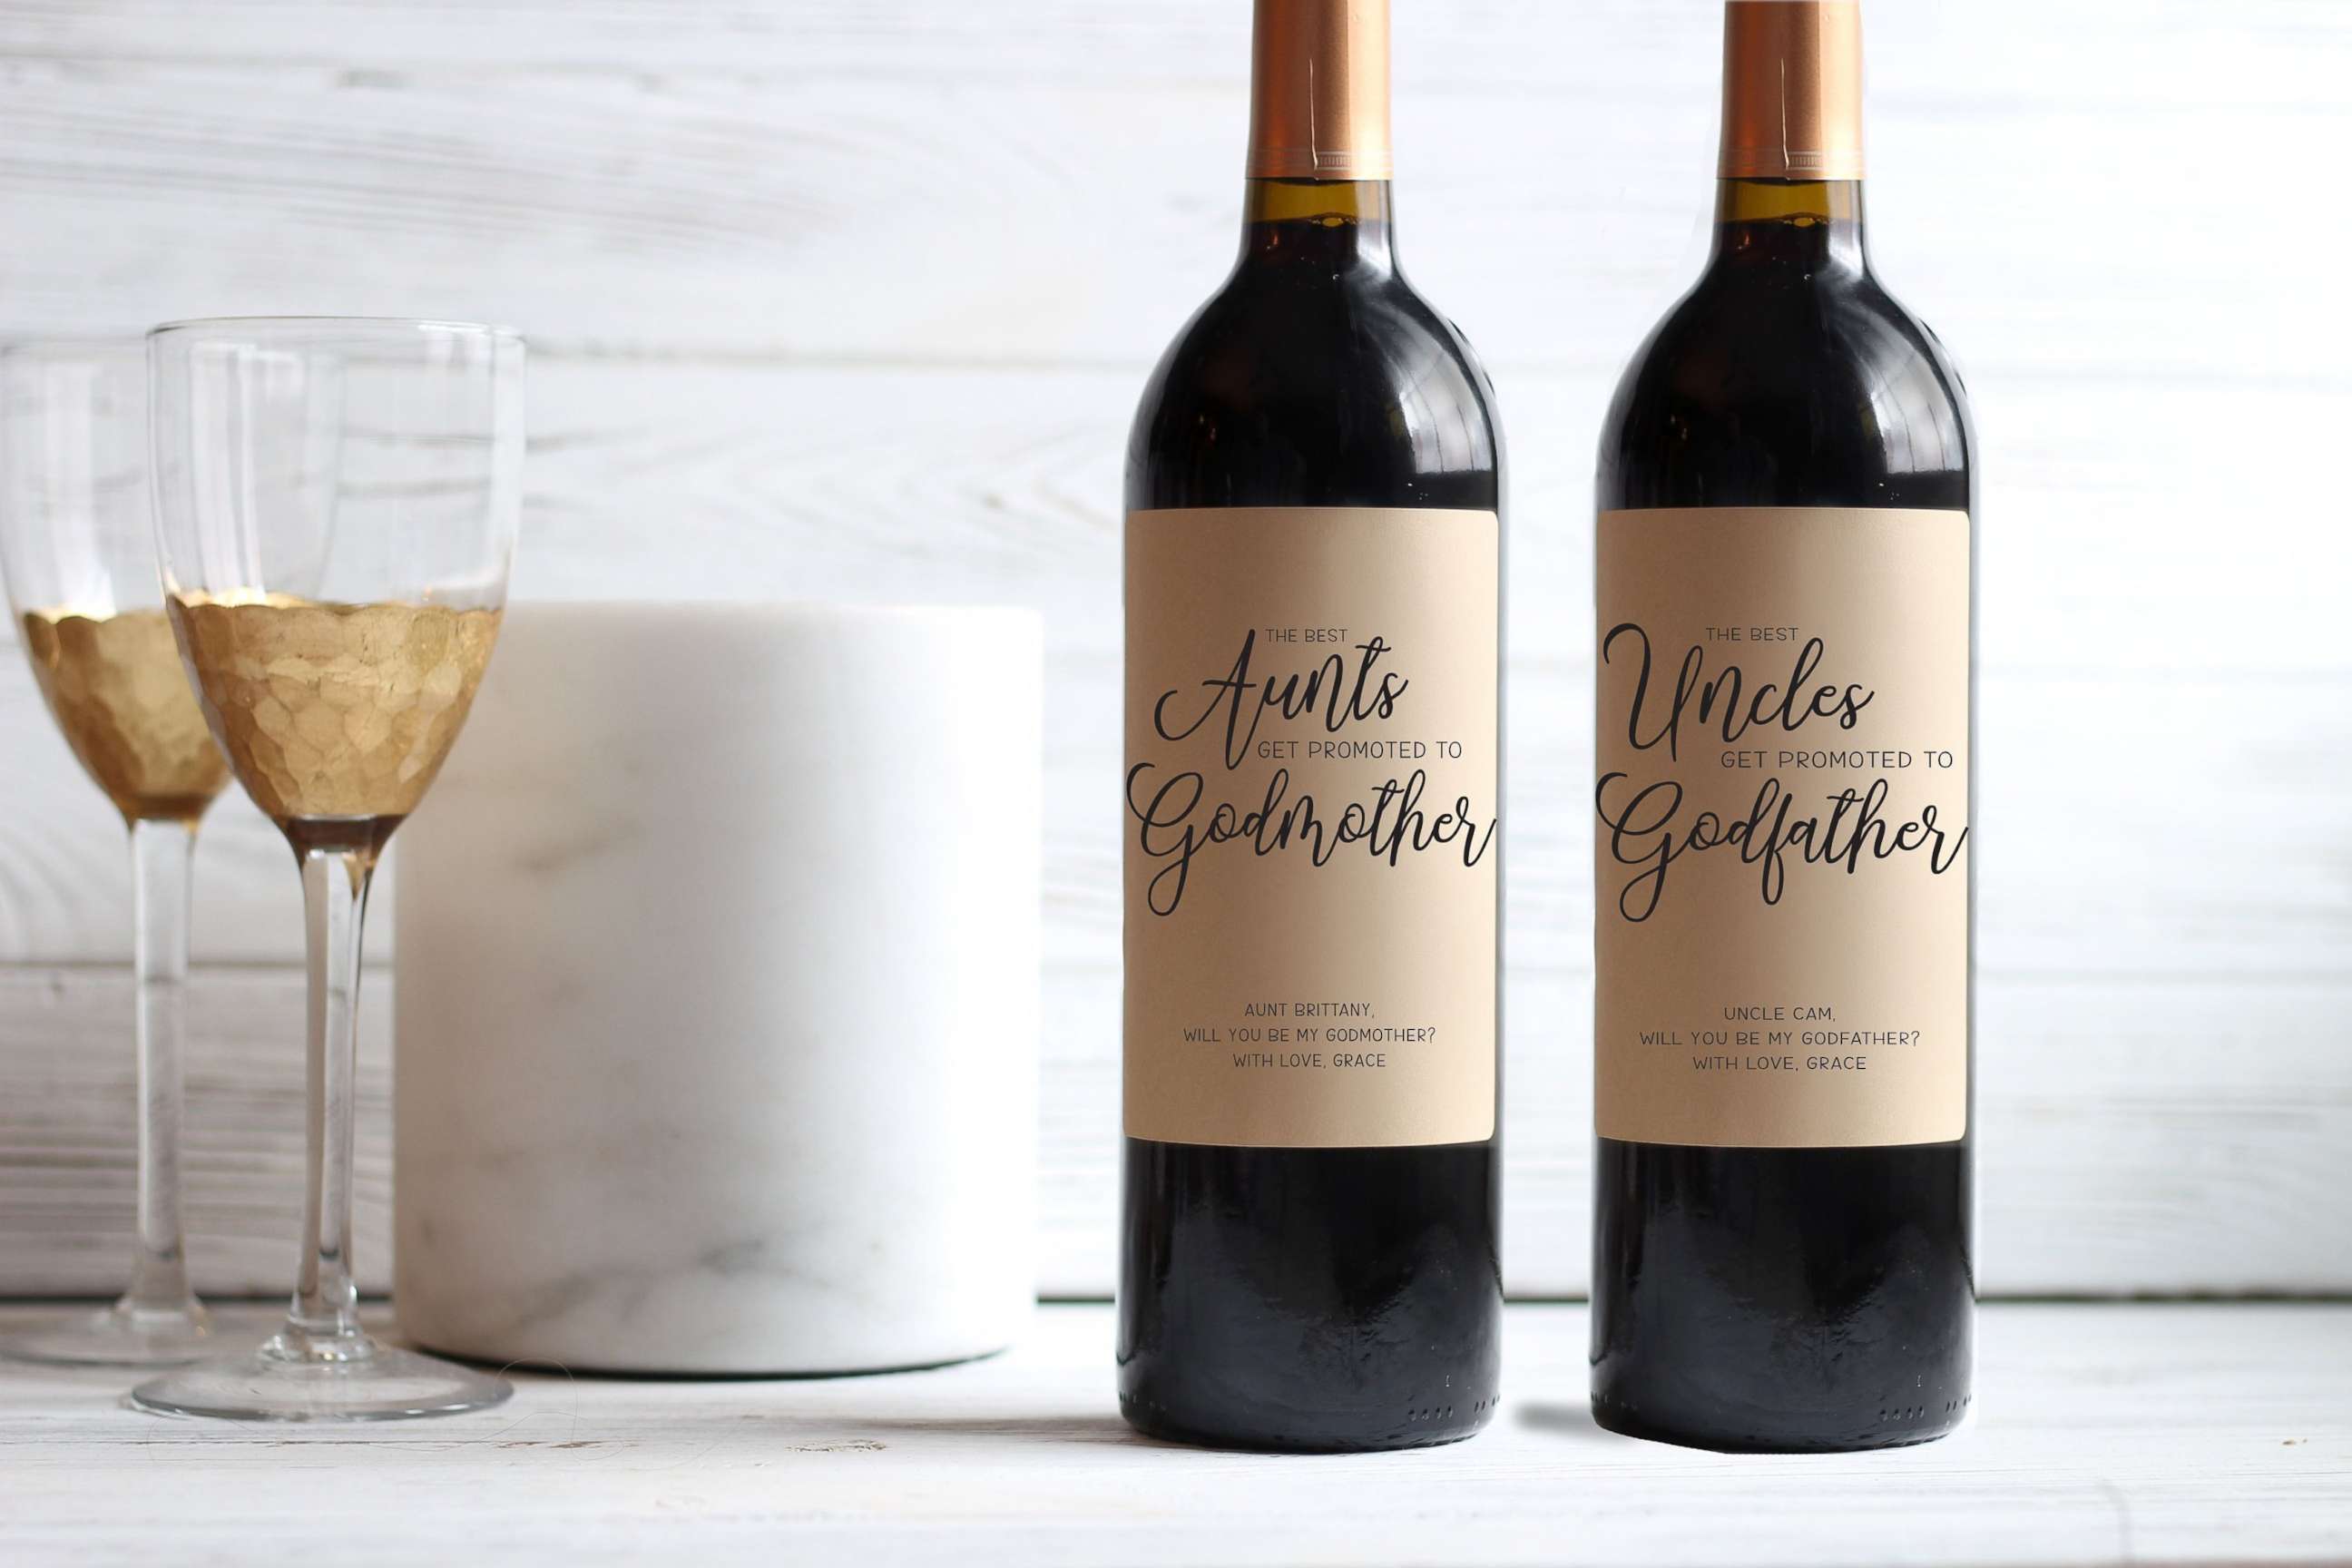 PHOTO: Wine labels with printed godparent proposals are pictured in an undated promotional image from PapersWithLove on Etsy.